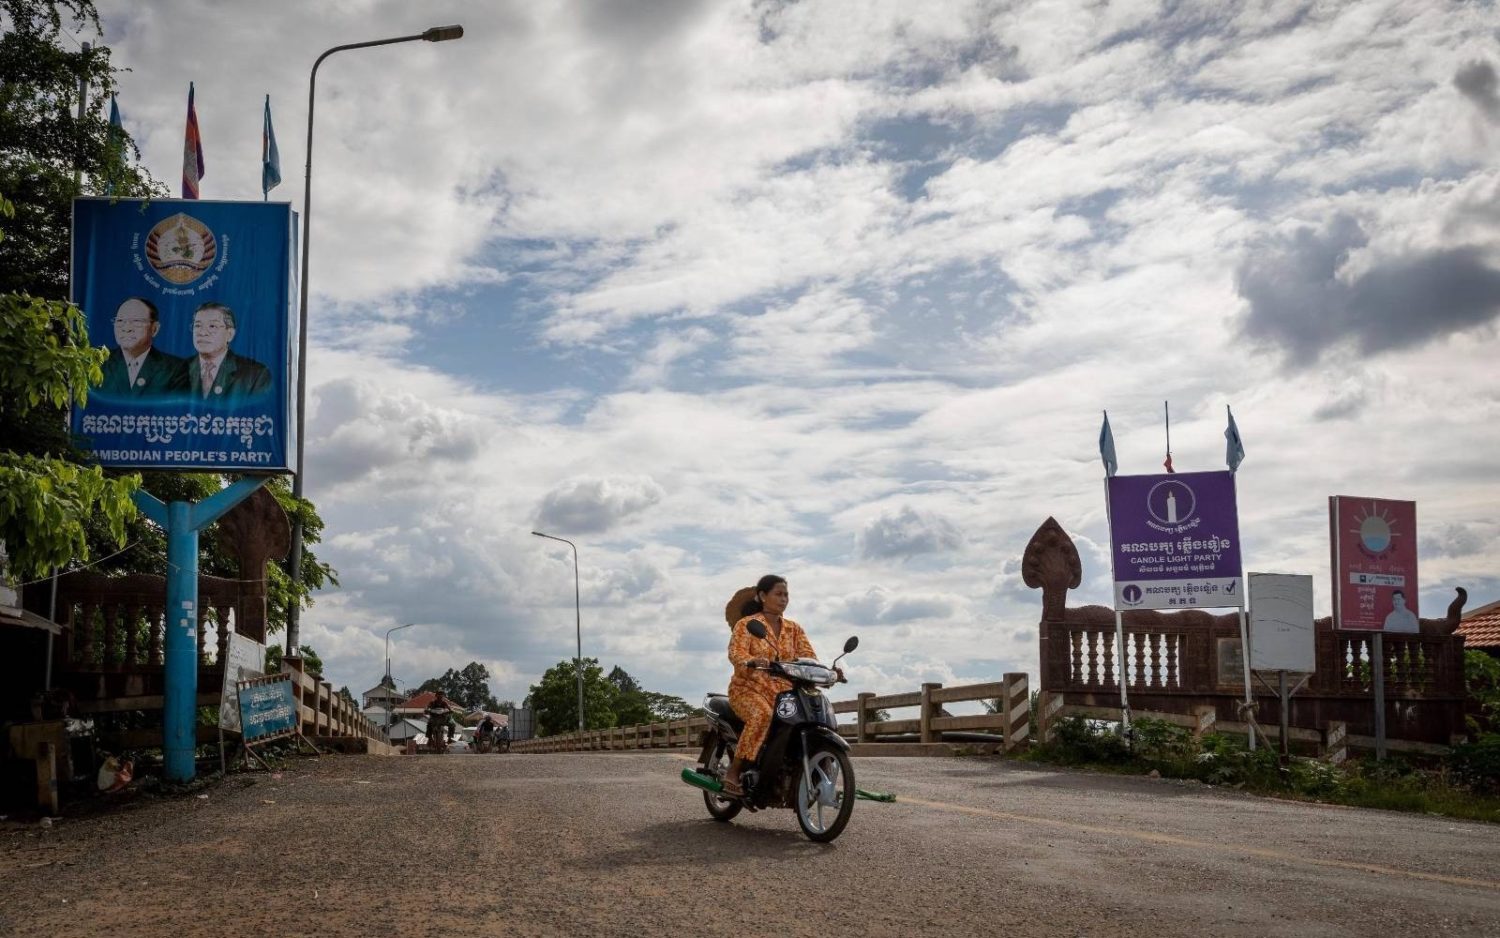 A motorist rides past political party billboards in Kampong Cham province's Sdao commune on May 8, 2022.